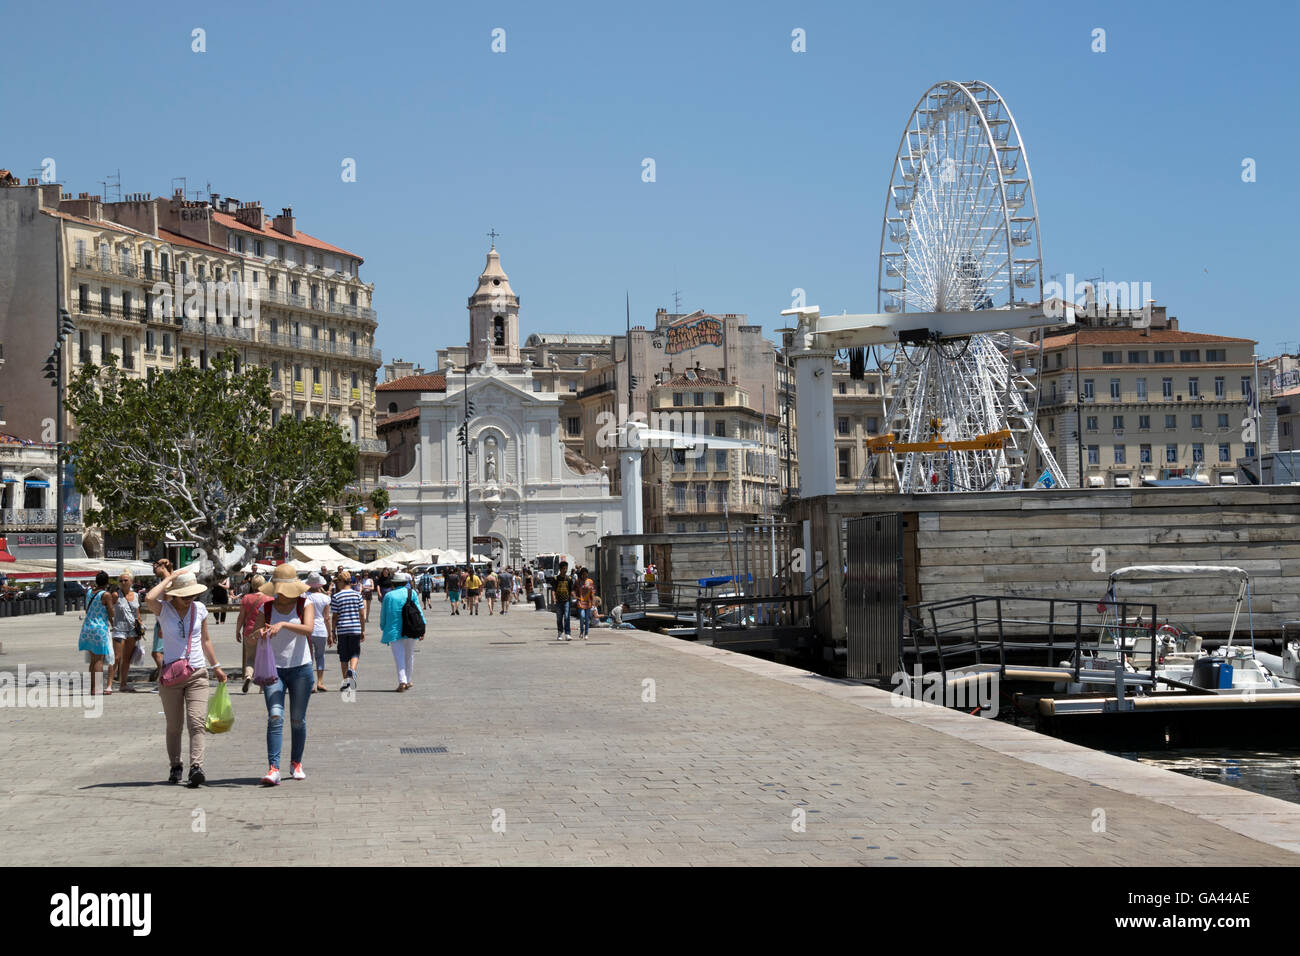 The centre of Marseilles' old port and promenade showing ferris wheel and Saint-Ferreol Cathedral. Stock Photo